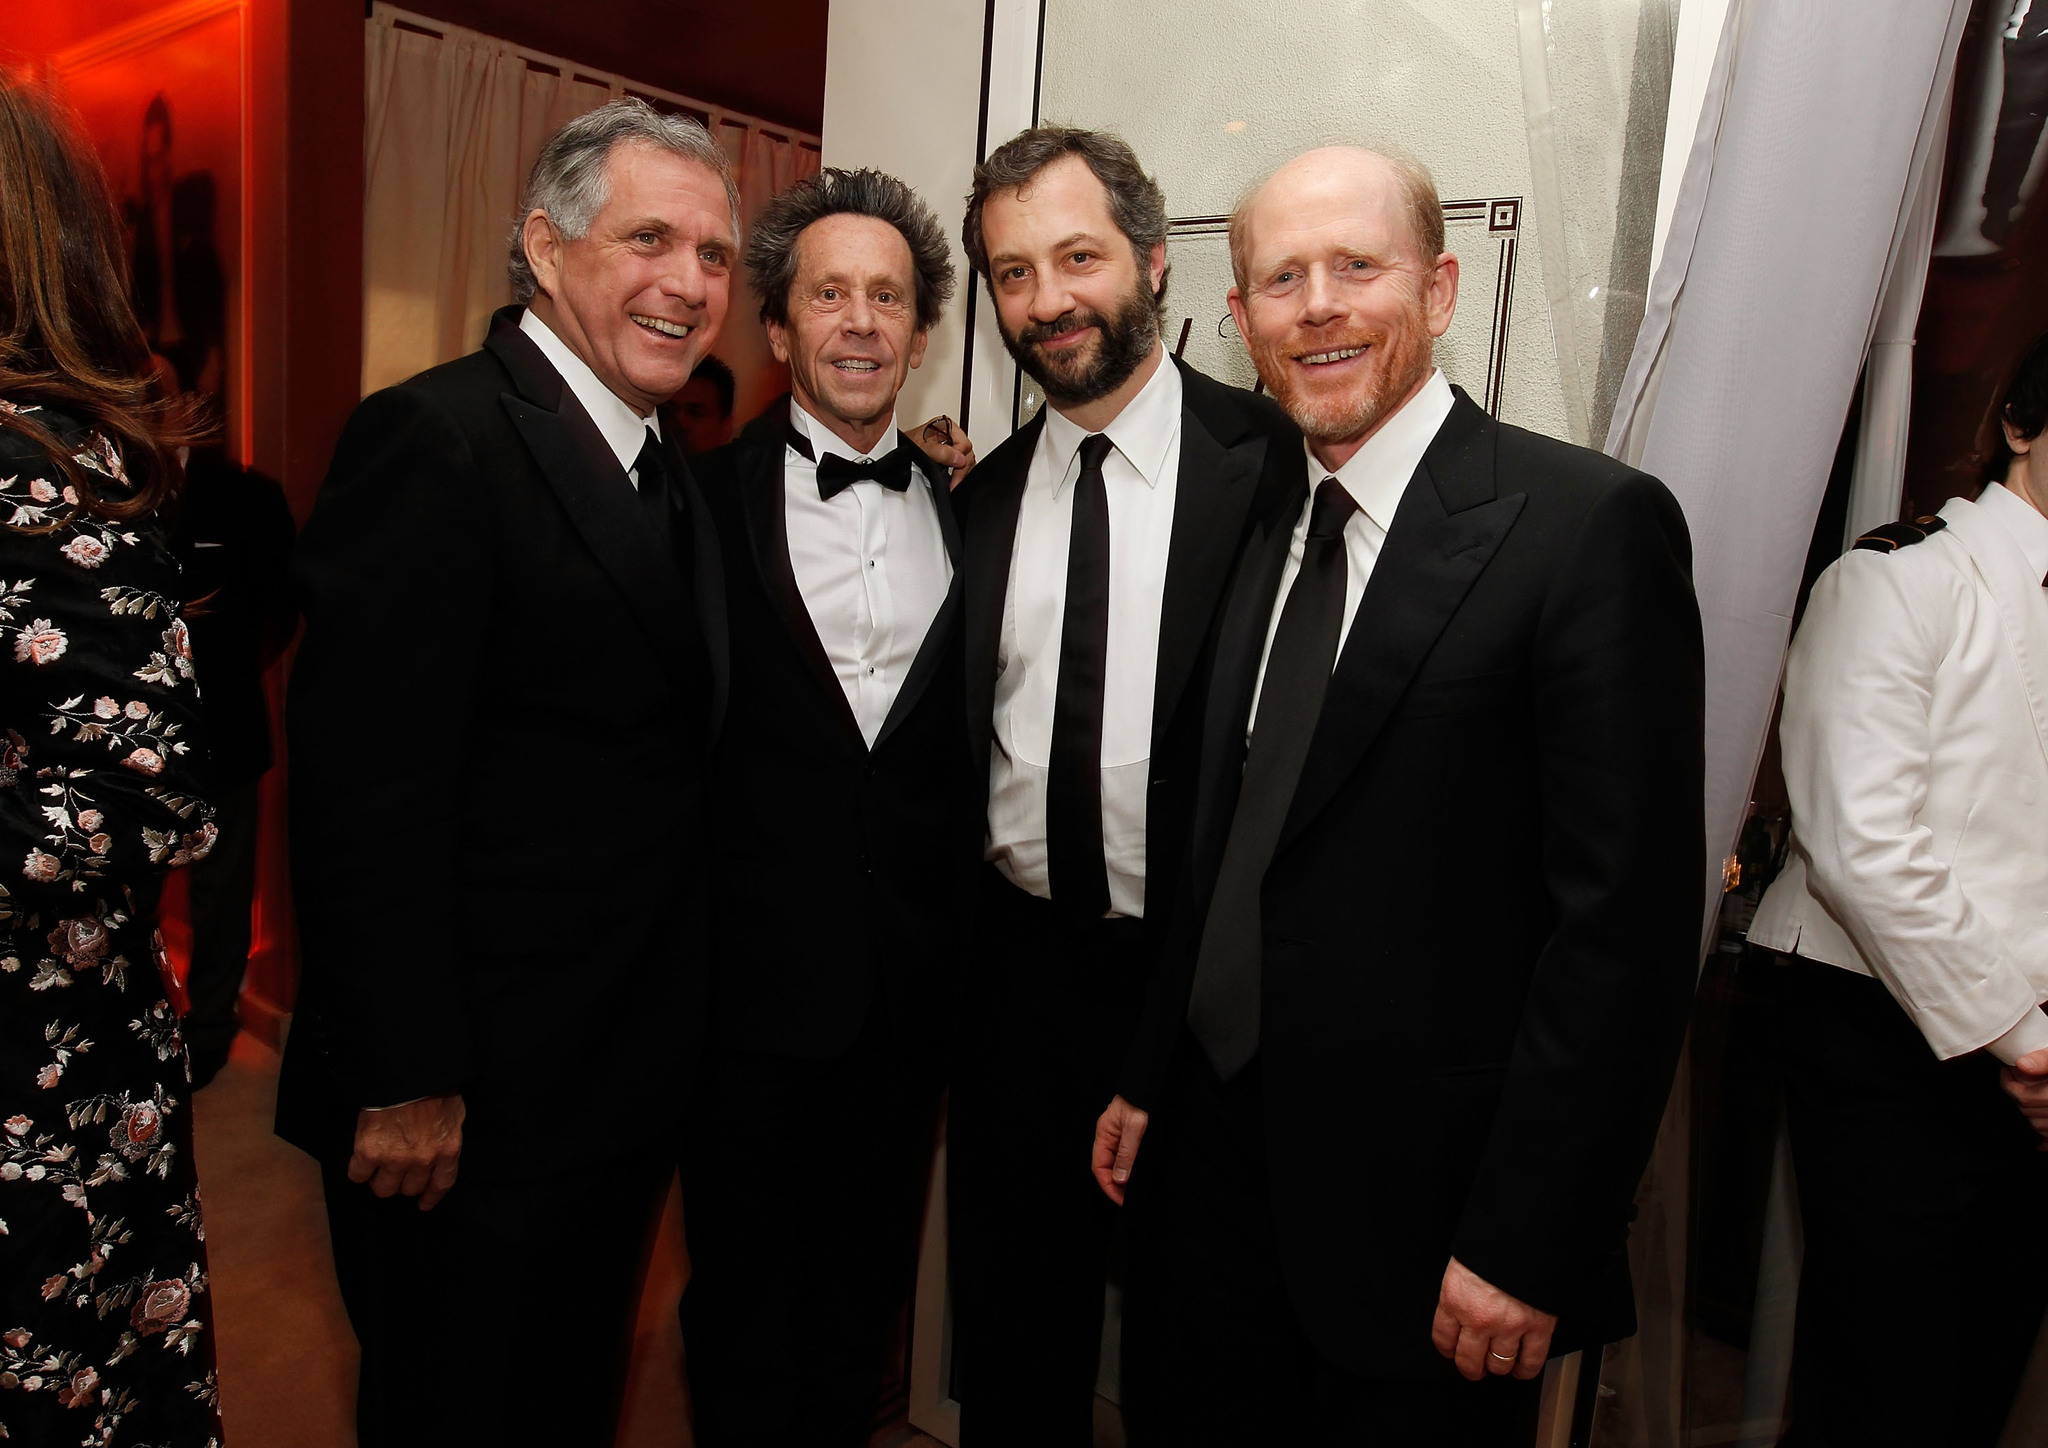 Ron Howard, Brian Grazer, Judd Apatow and Leslie Moonves